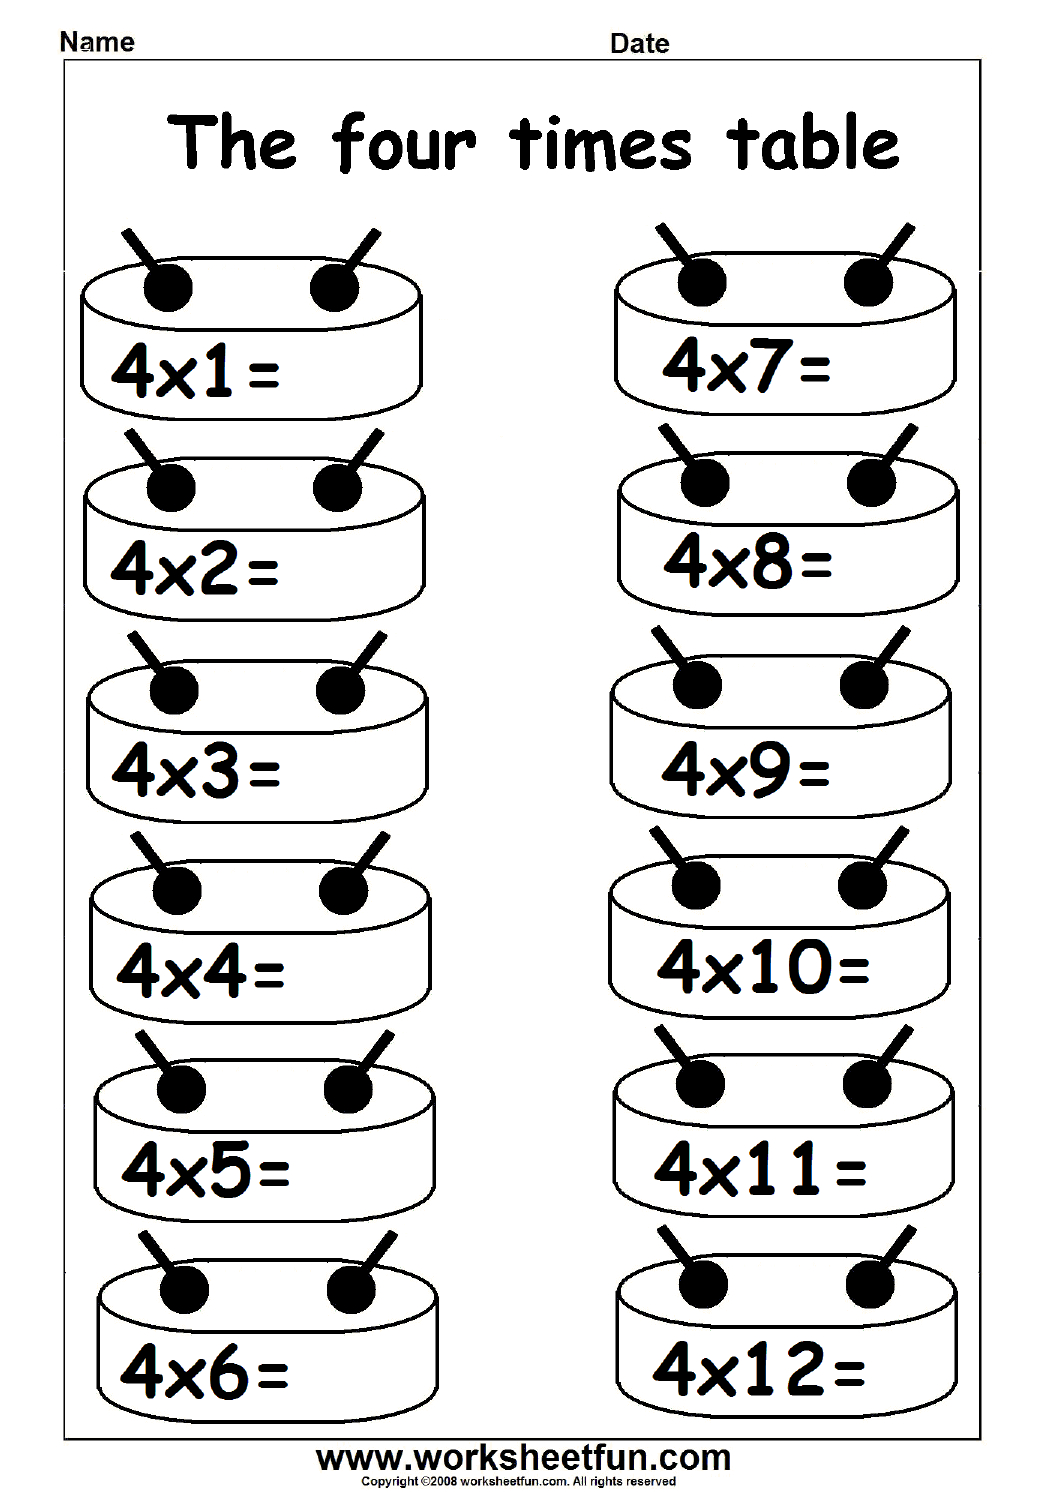 Multiplication Times Table Practice - 2-12 Times Table with Printable Multiplication Worksheets 2-12